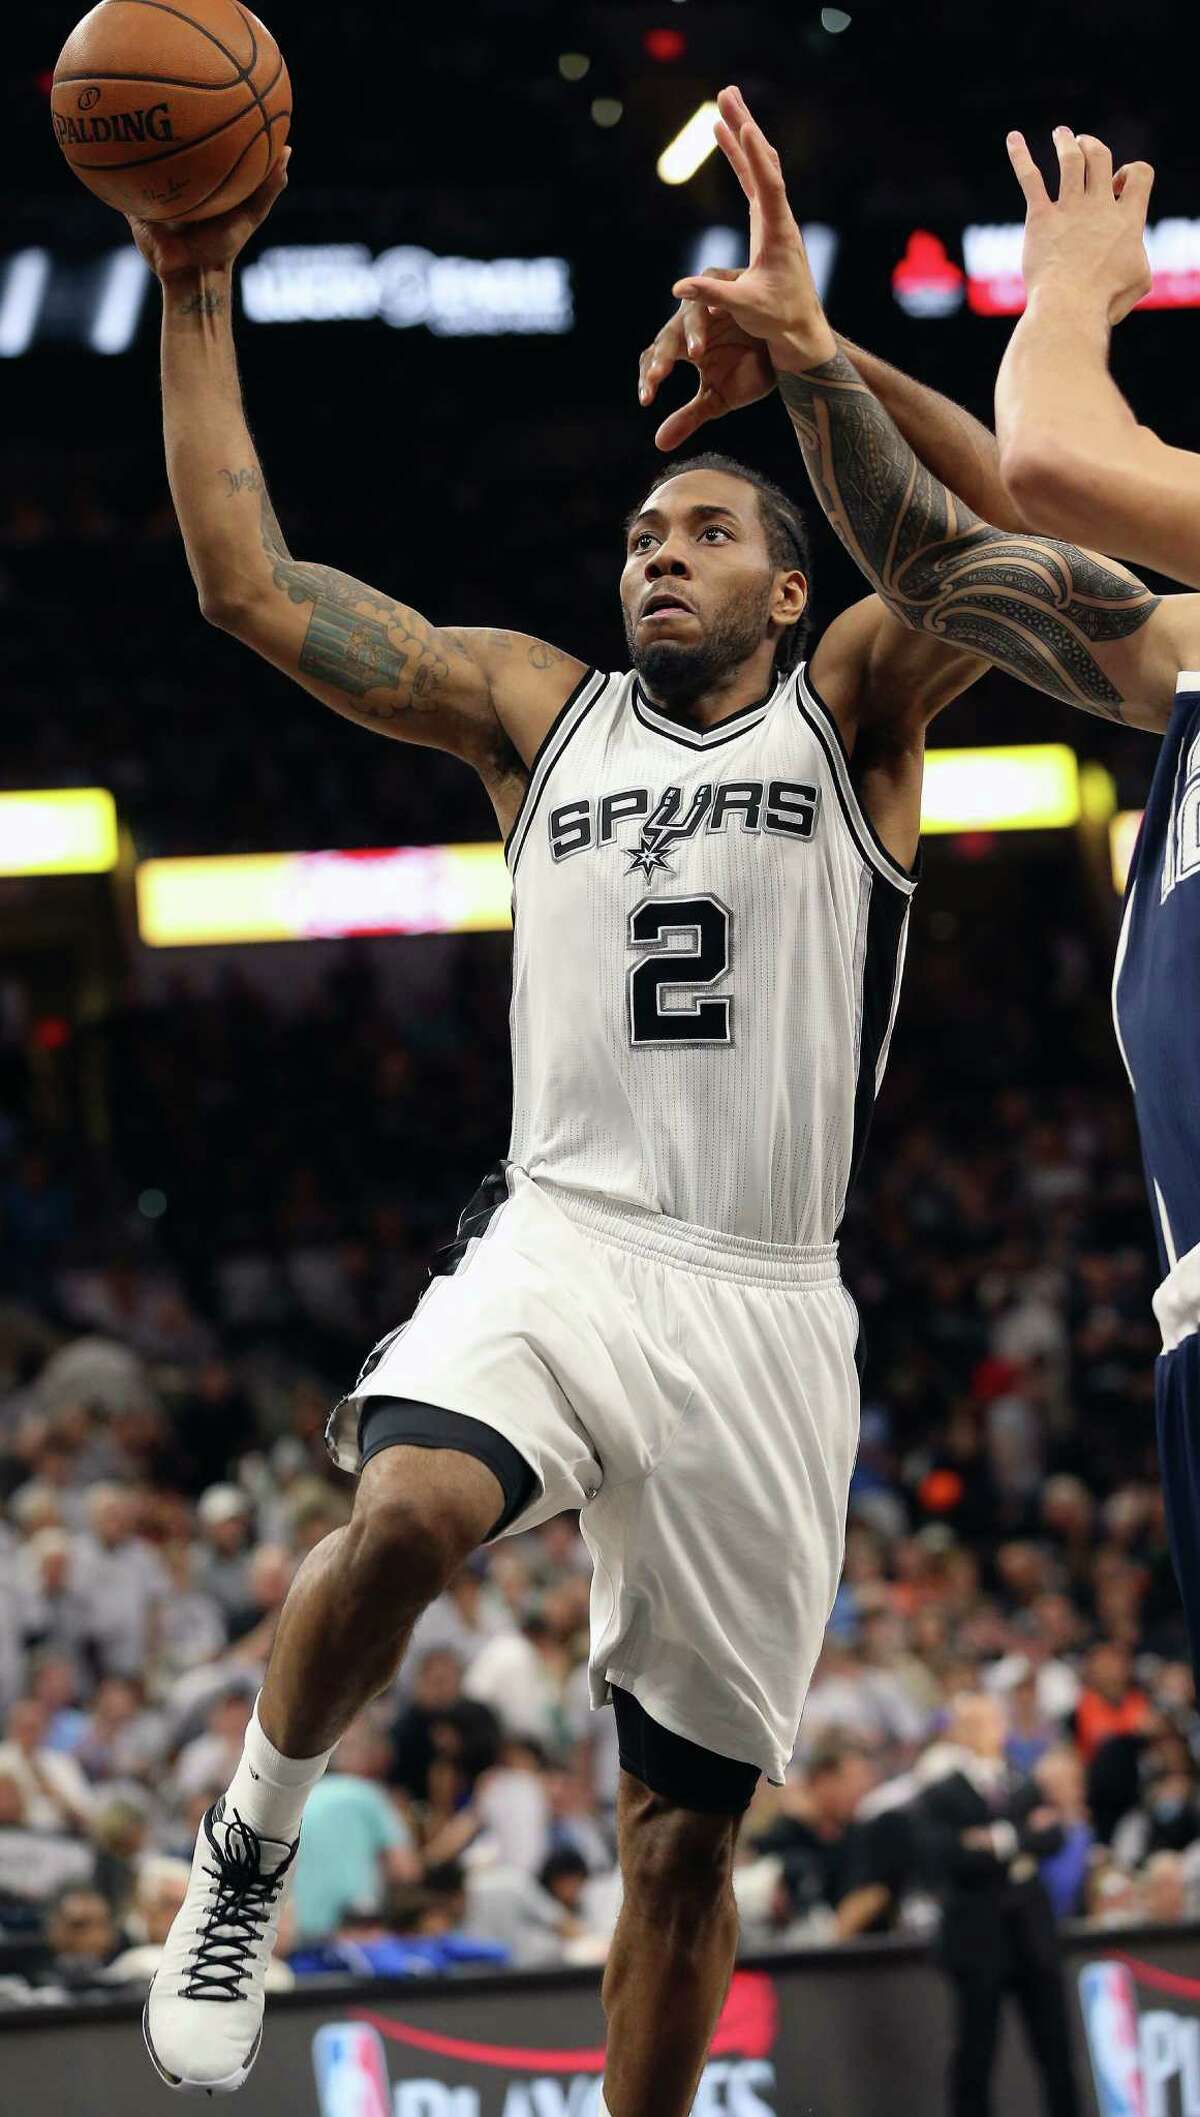 Kawhi Leonard goes in for a first quarter slam as the Spurs host the Thunder in game 1 of second round NBA playoff action at the AT&T Center on April 230, 2016.